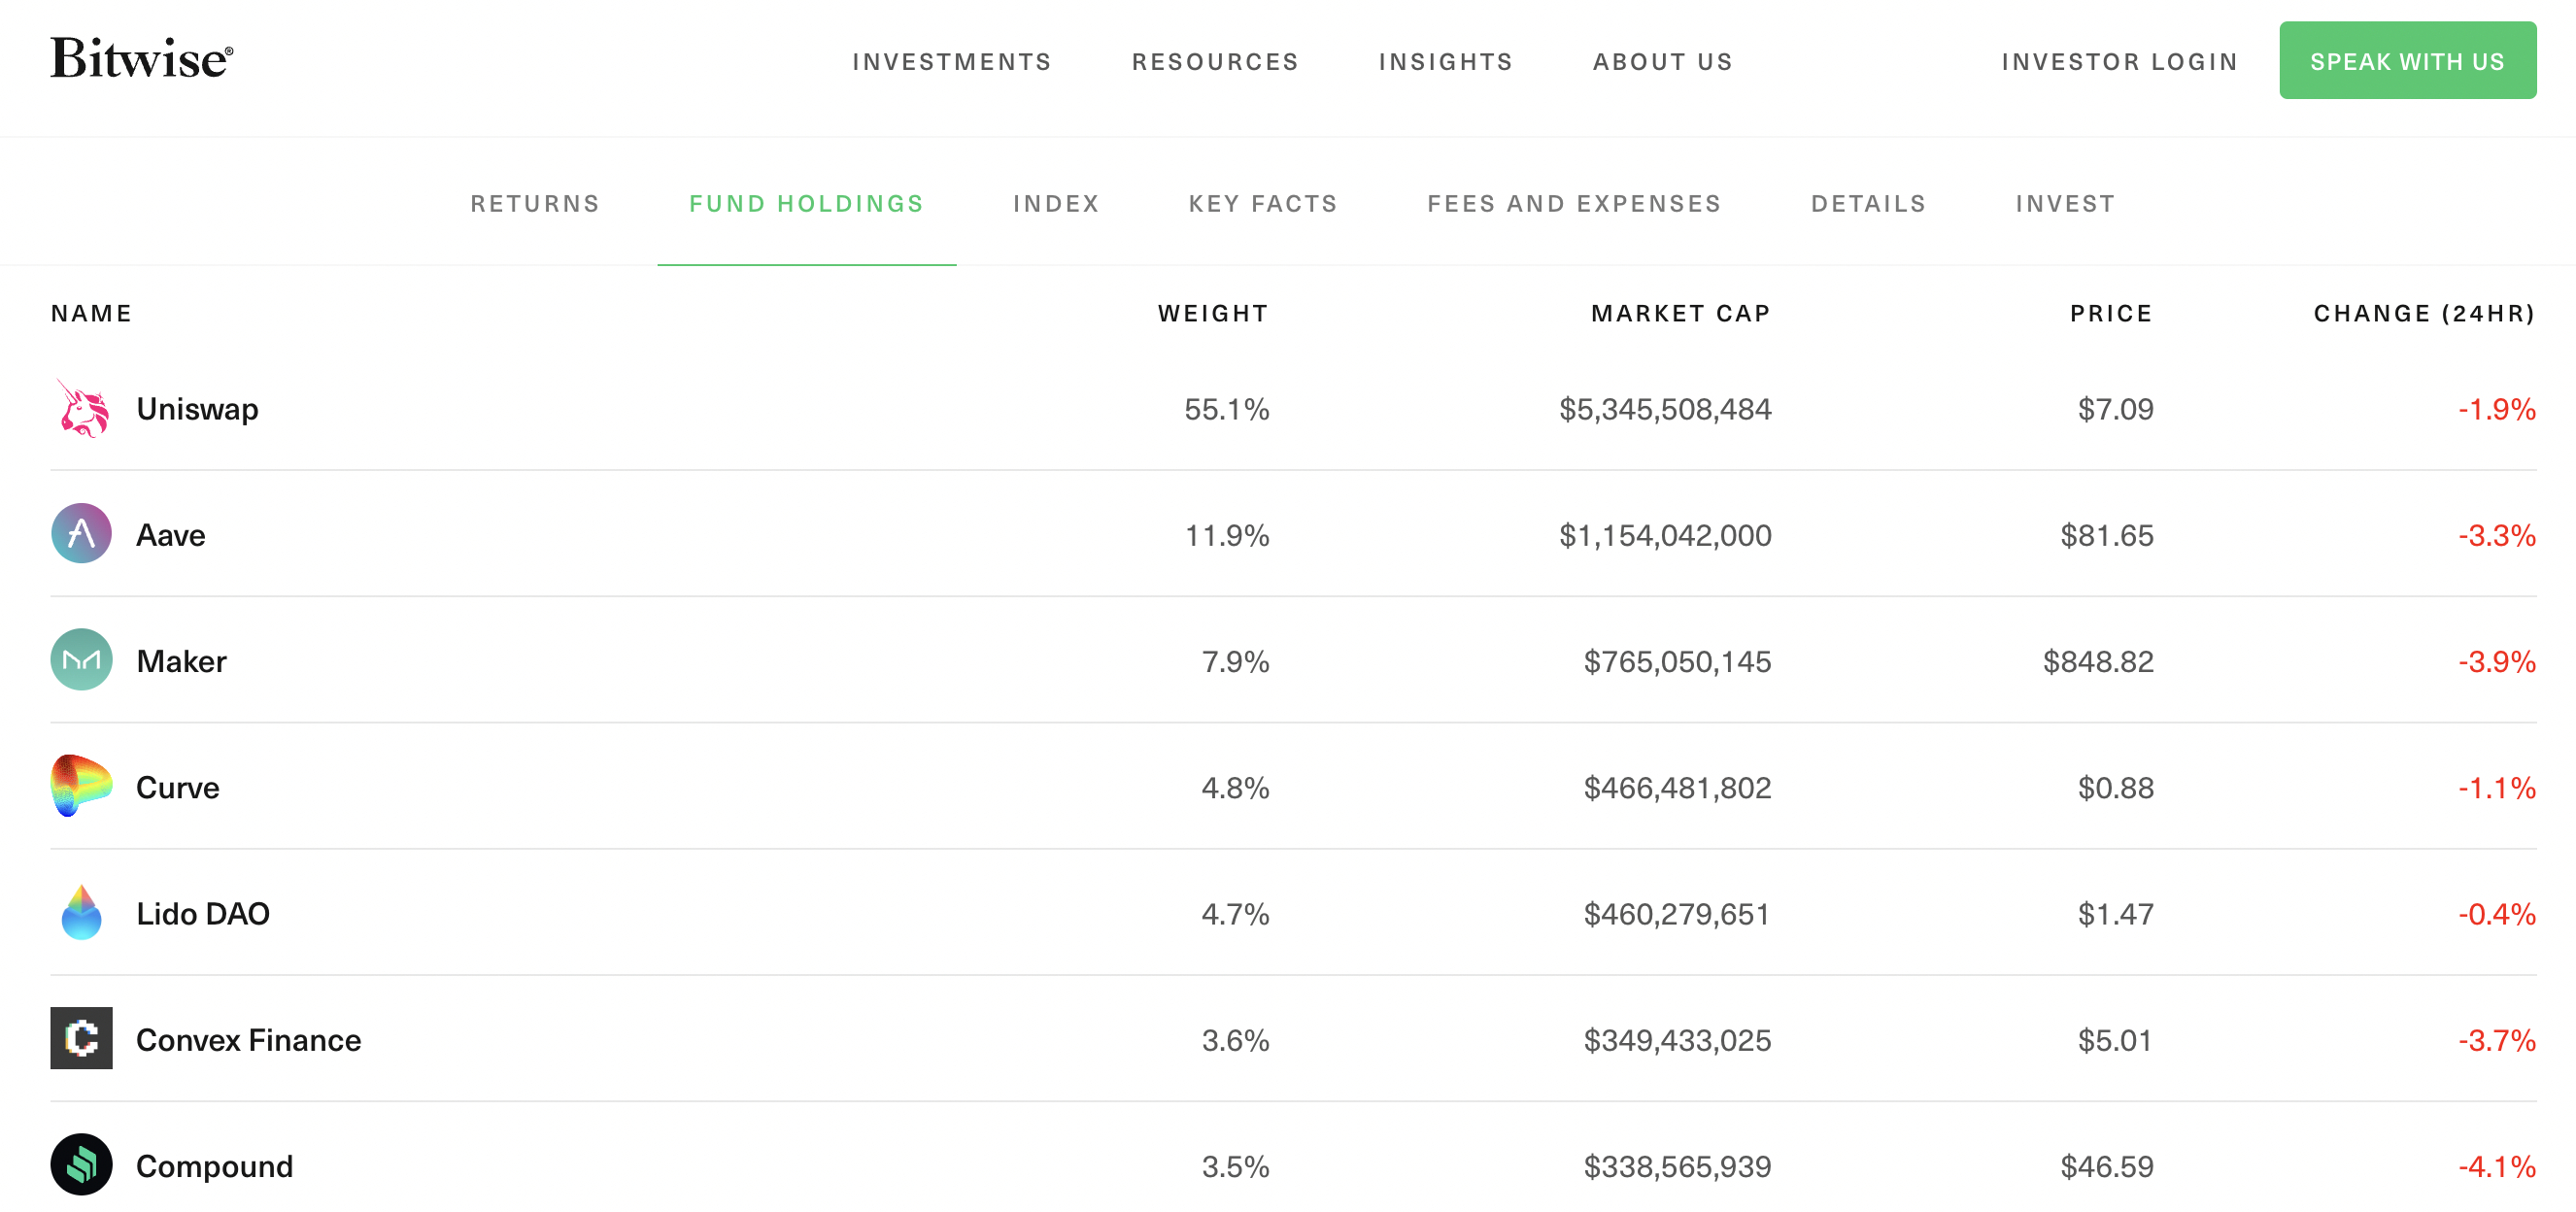 Bitwise fund holdings